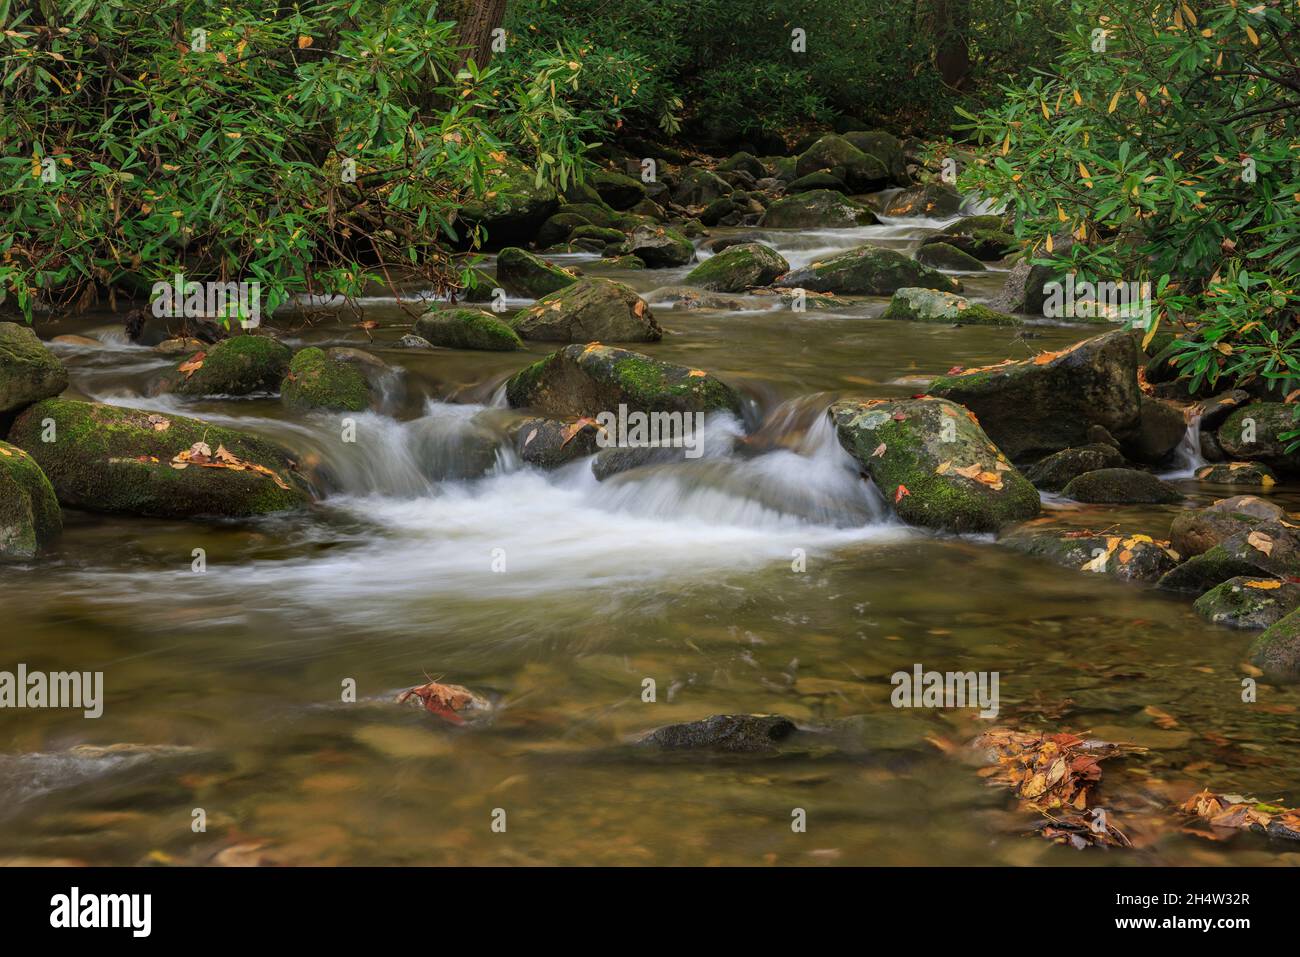 Rock Creek flows over rocks under fall foliage in the Cosby section of Great Smoky Mountains National Park. Stock Photo